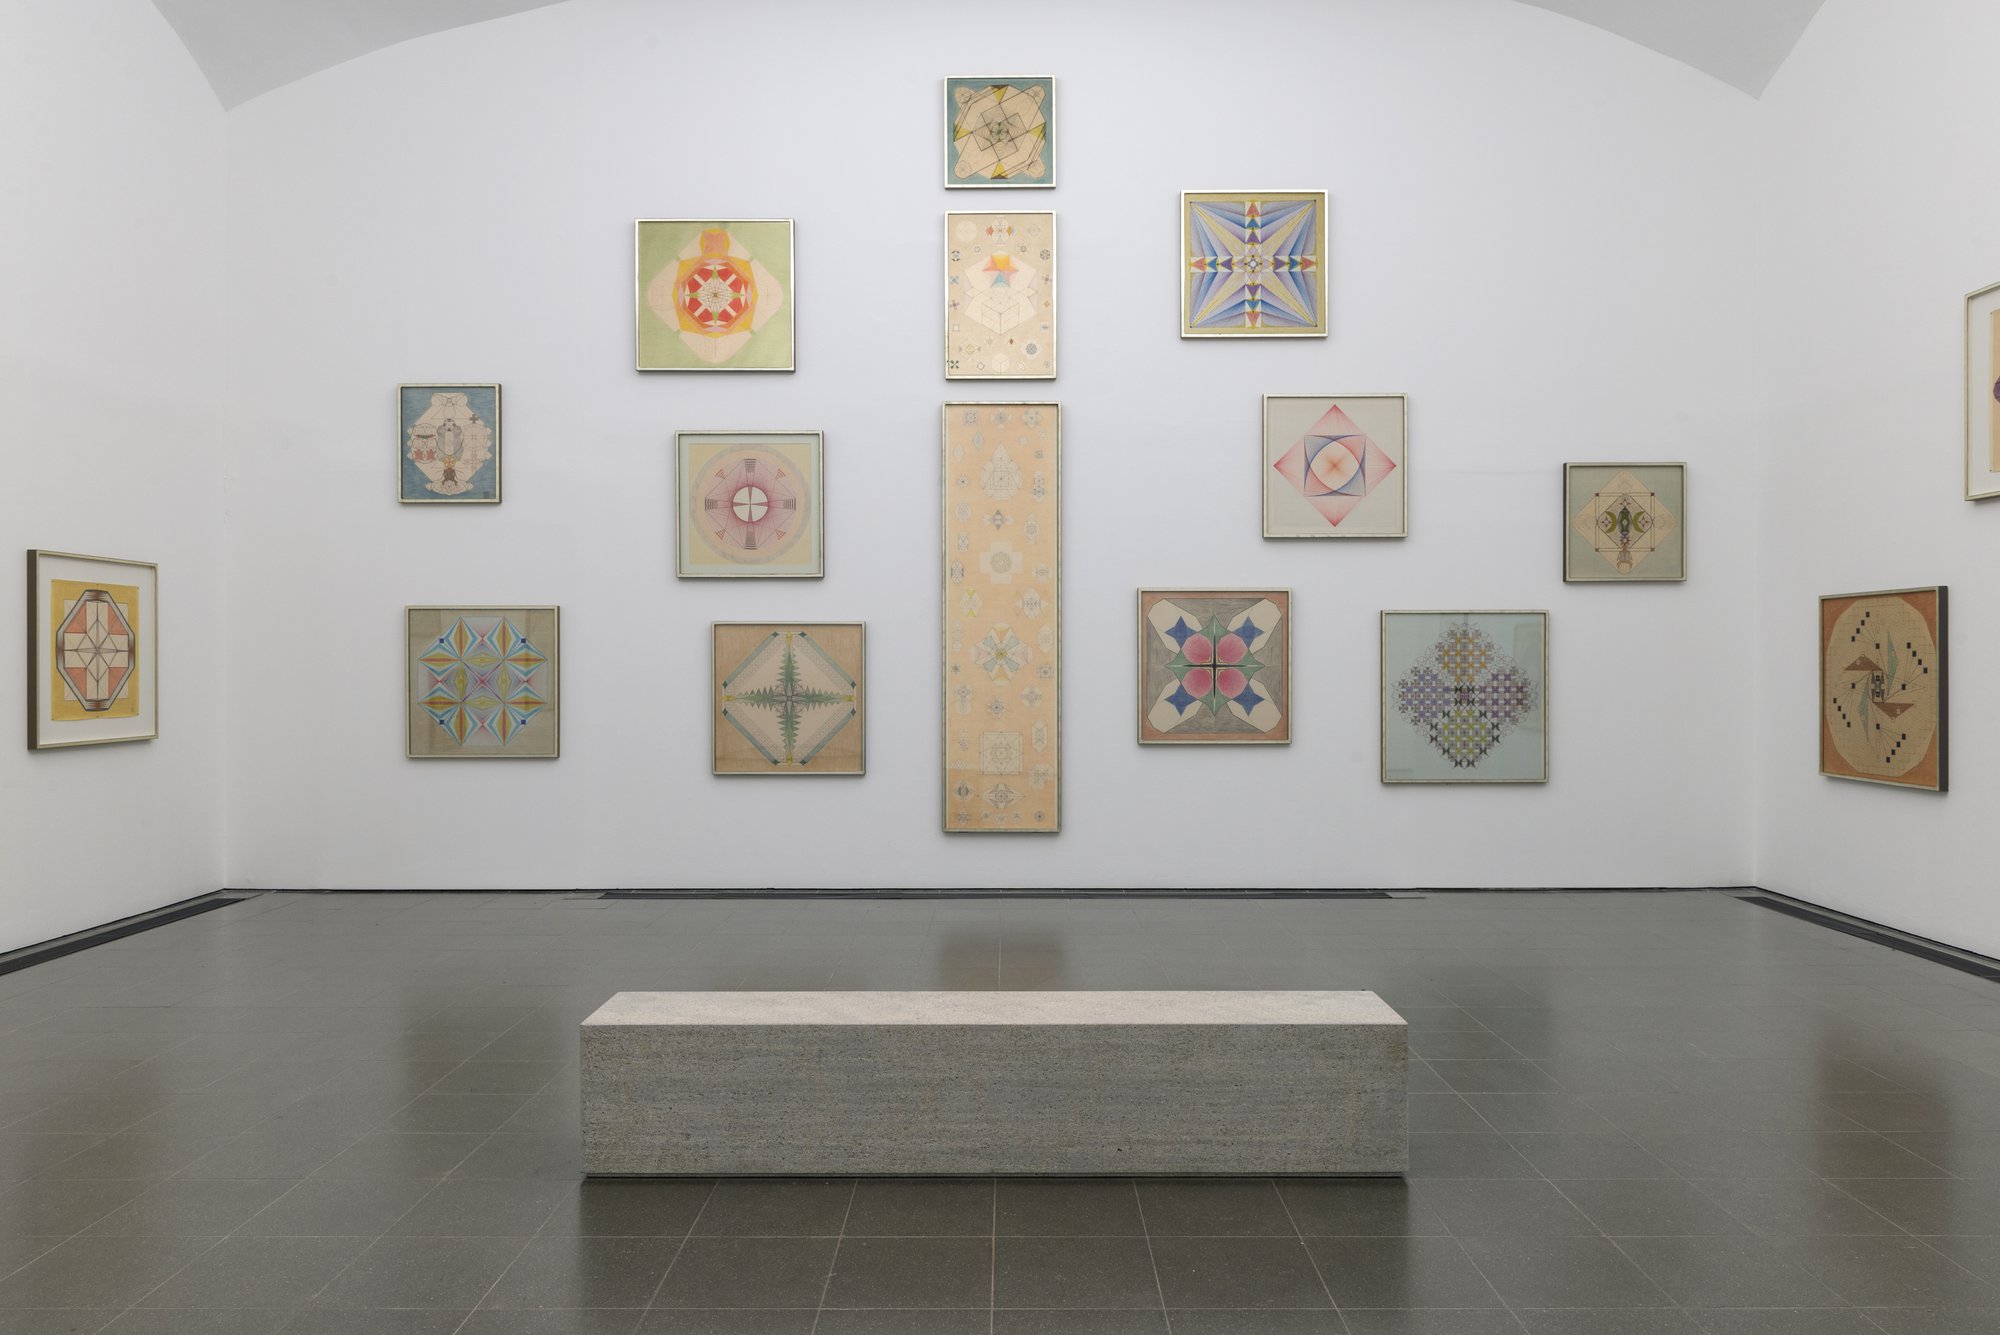 Christodoulos Panayiotou, Installation view, Emma Kunz – Visionary Drawings: An Exhibition conceived with Christodoulos Panayiotou, Serpentine Gallery, London, 2019